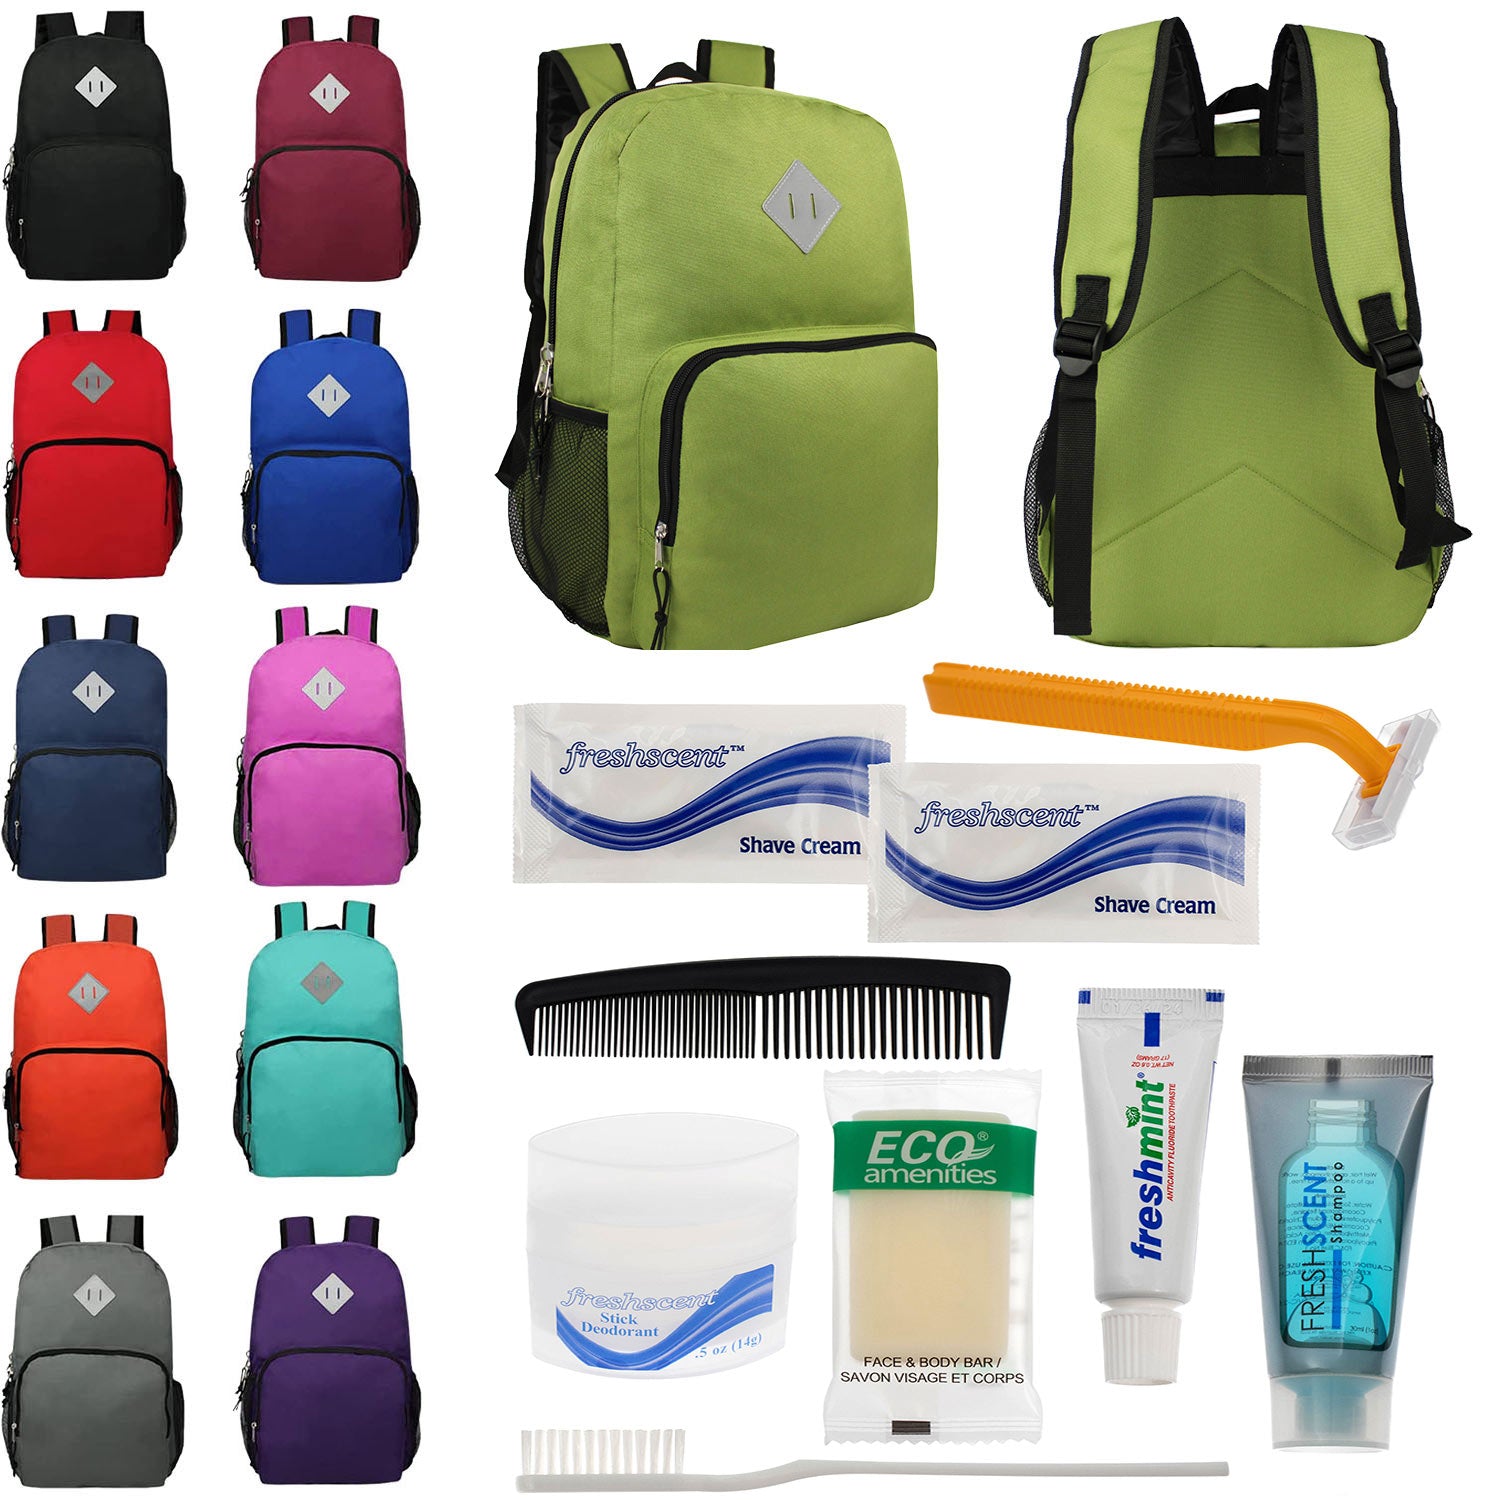 Bulk Case of 12 18" Backpacks and 12 Hygiene / Toiletries Kit - Wholesale Care Package - Disaster Relief Kit, Homeless, Charity